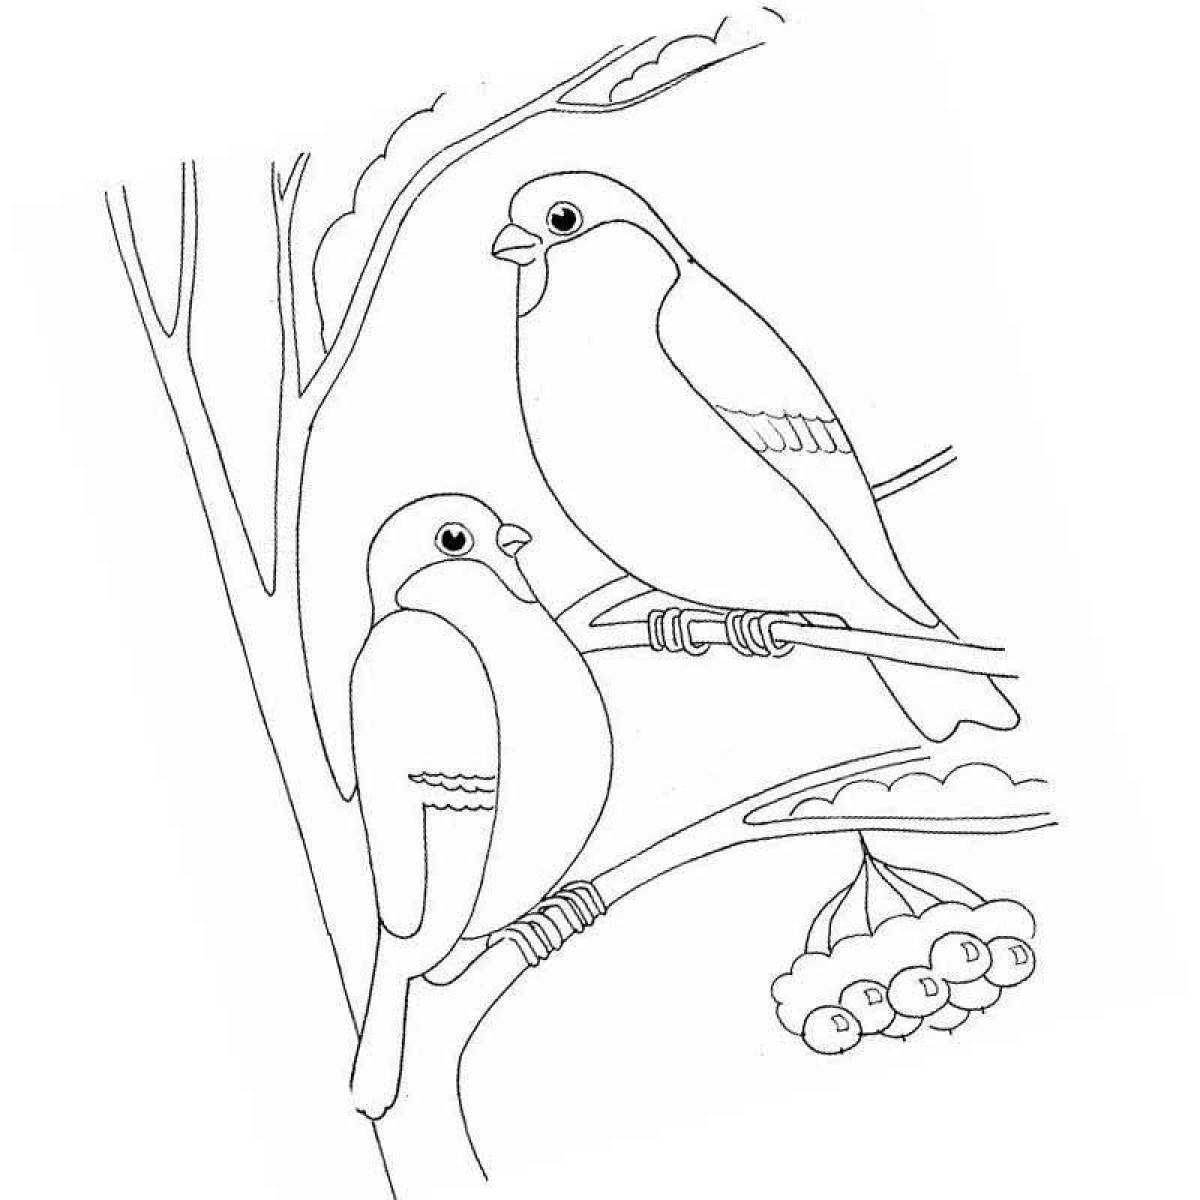 Glowing wintering birds picture for kids with names